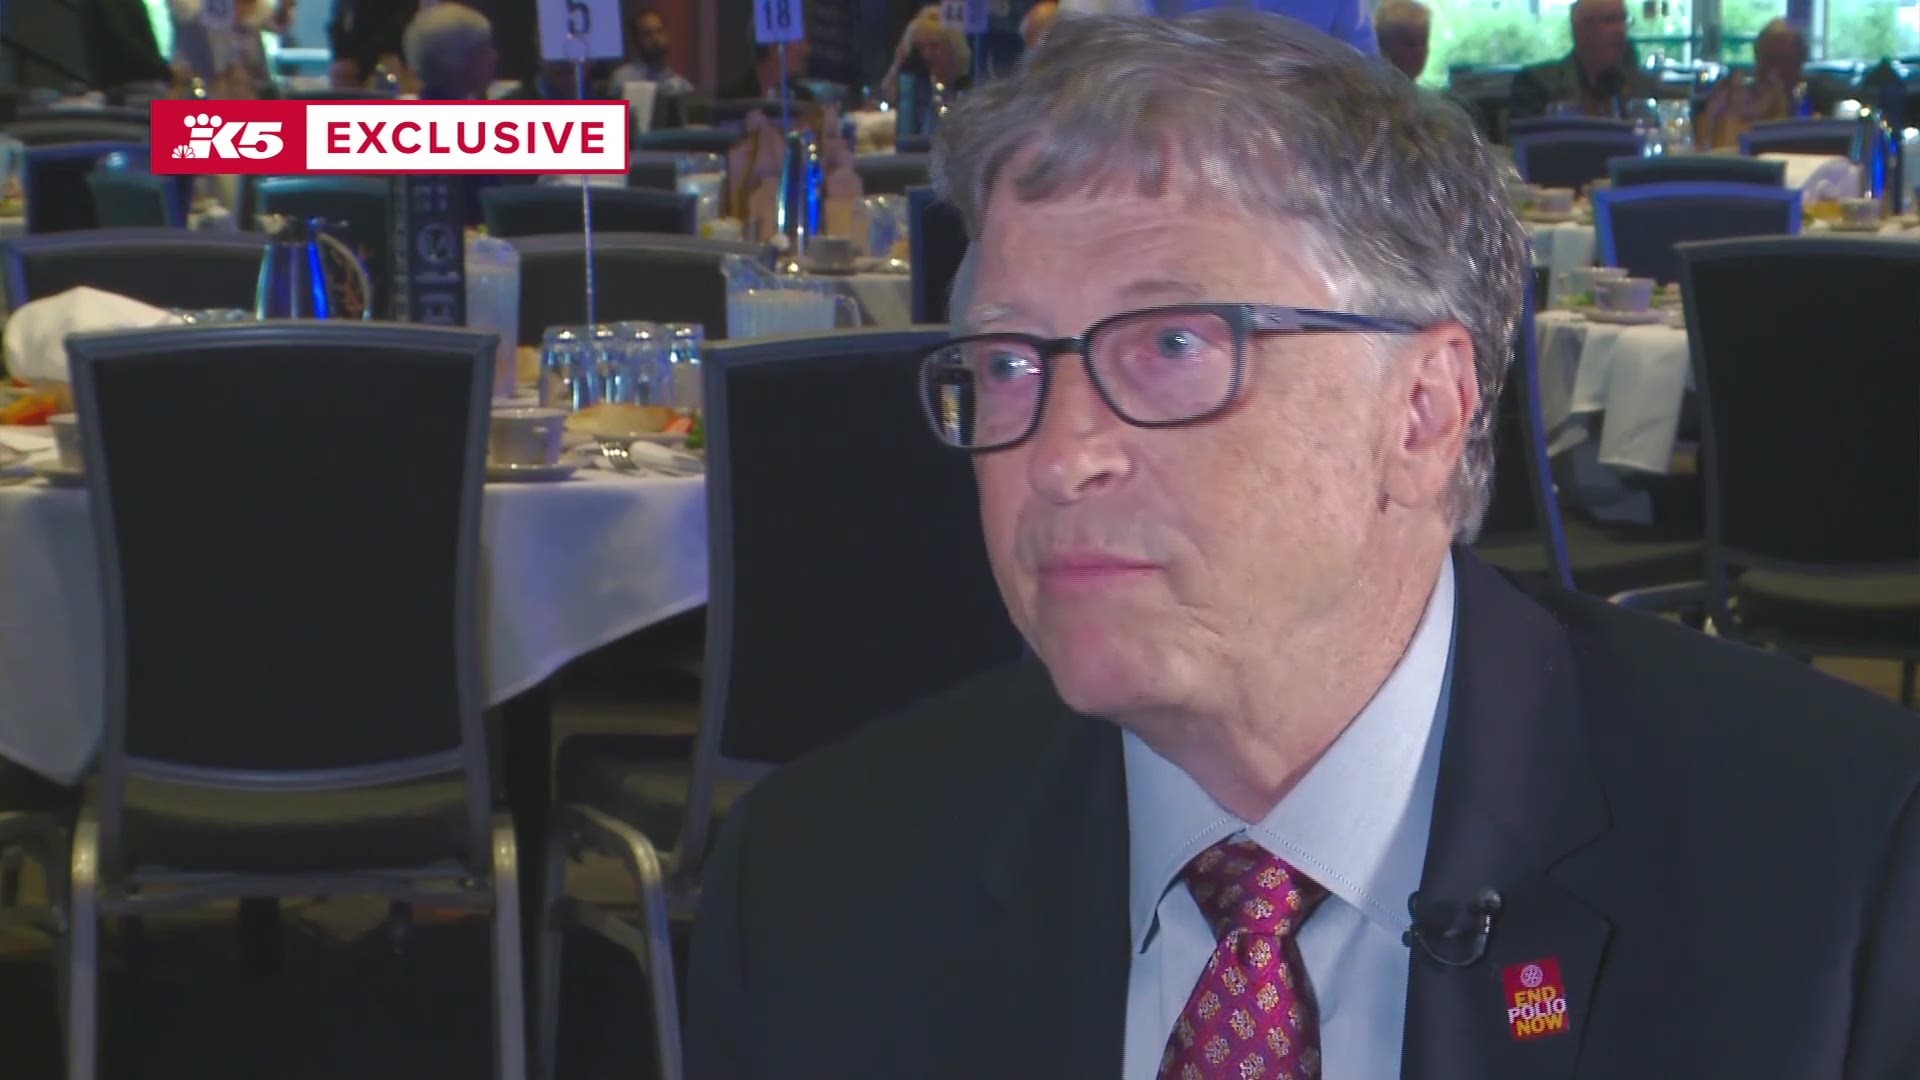 Microsoft co-founder and philanthropist Bill Gates shares why his work on global health is what he’s most proud of in his philanthropic career.